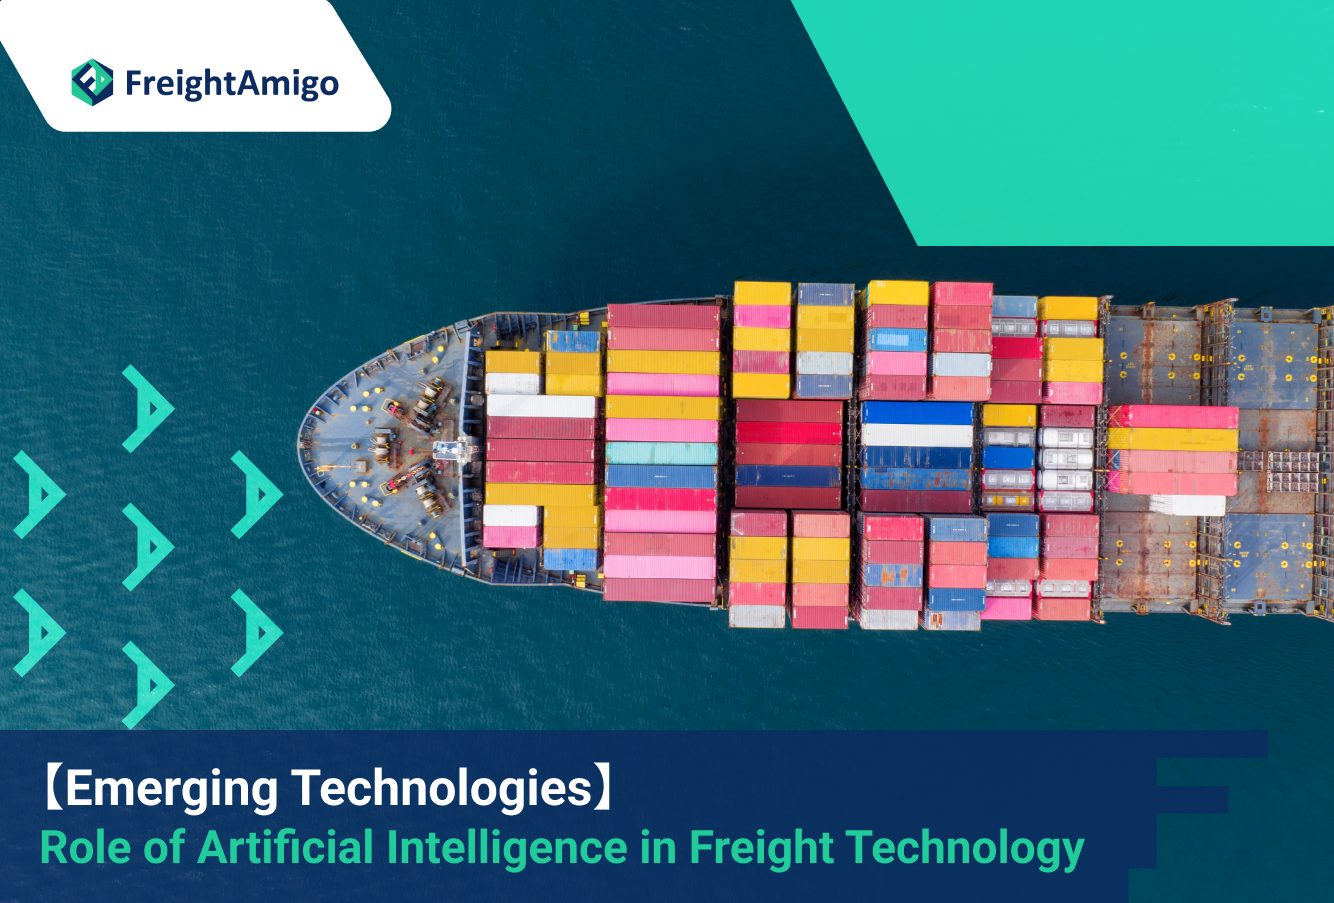 【Emerging Technologies】 The Role of Artificial Intelligence in Freight Technology